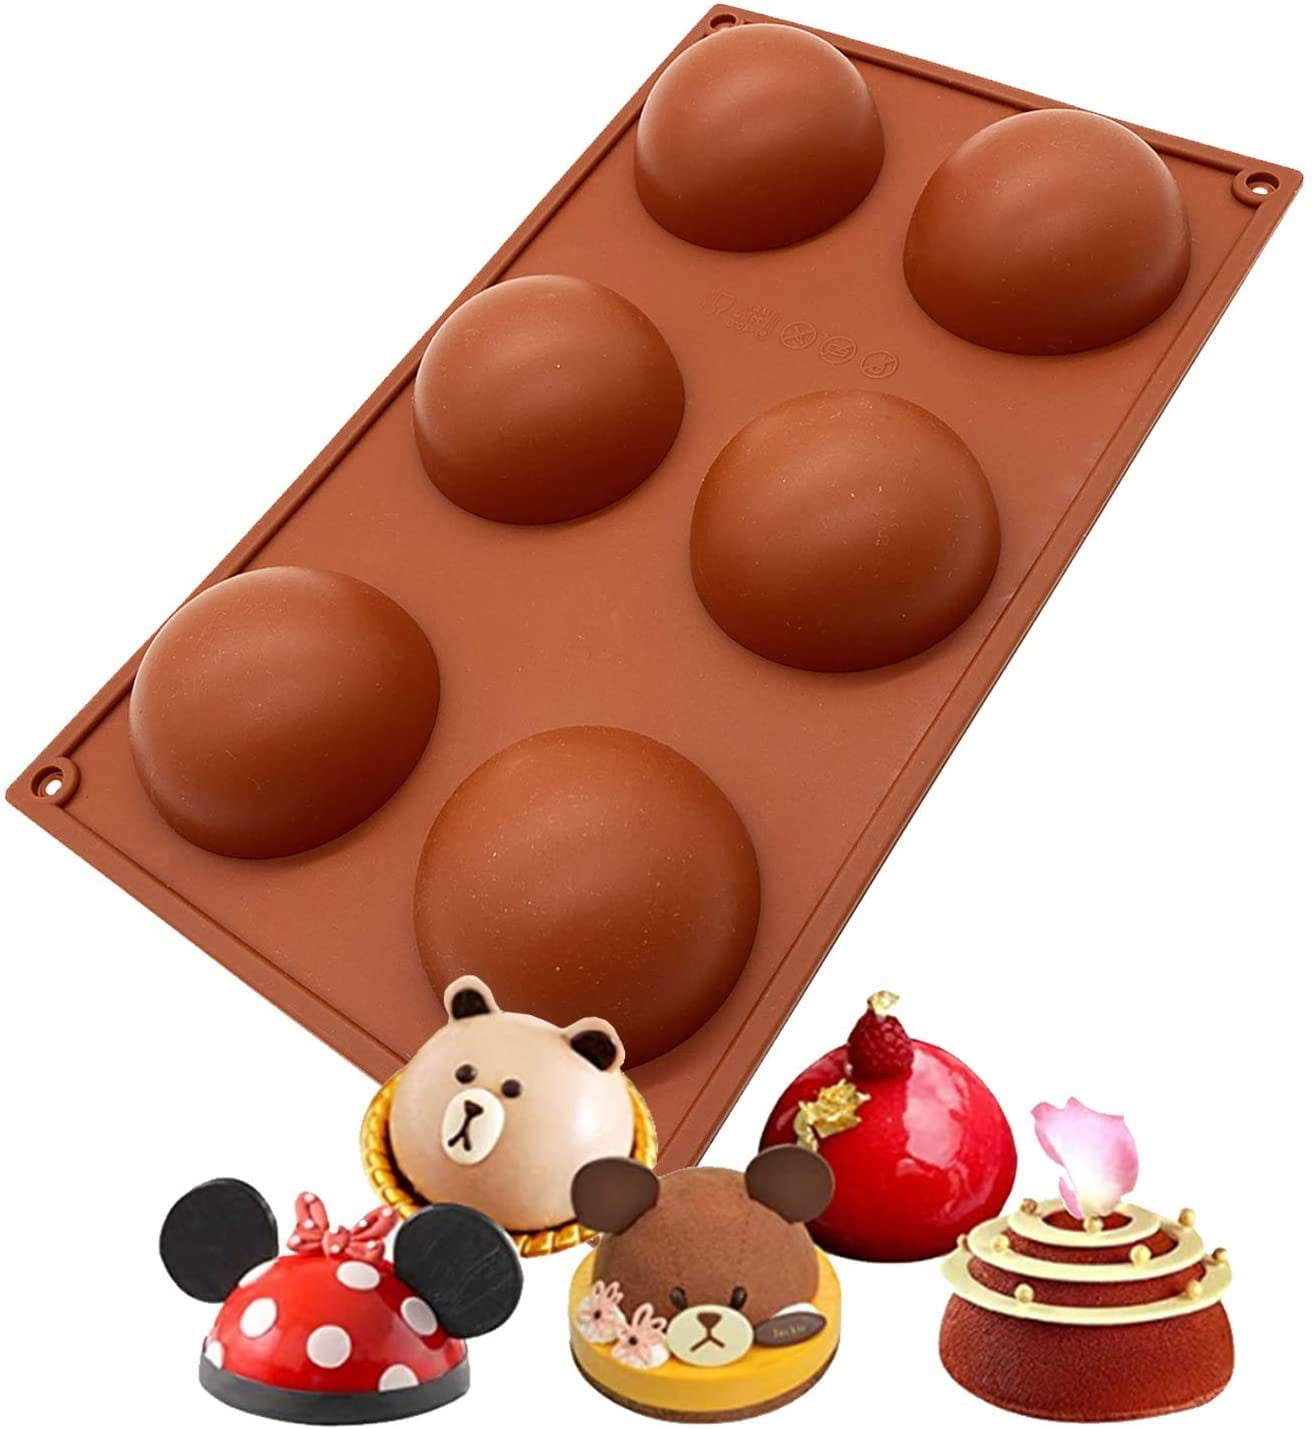 6-Holes Half Ball Sphere Chocolate Cake Muffin Pastry Mold Tray Silicone New